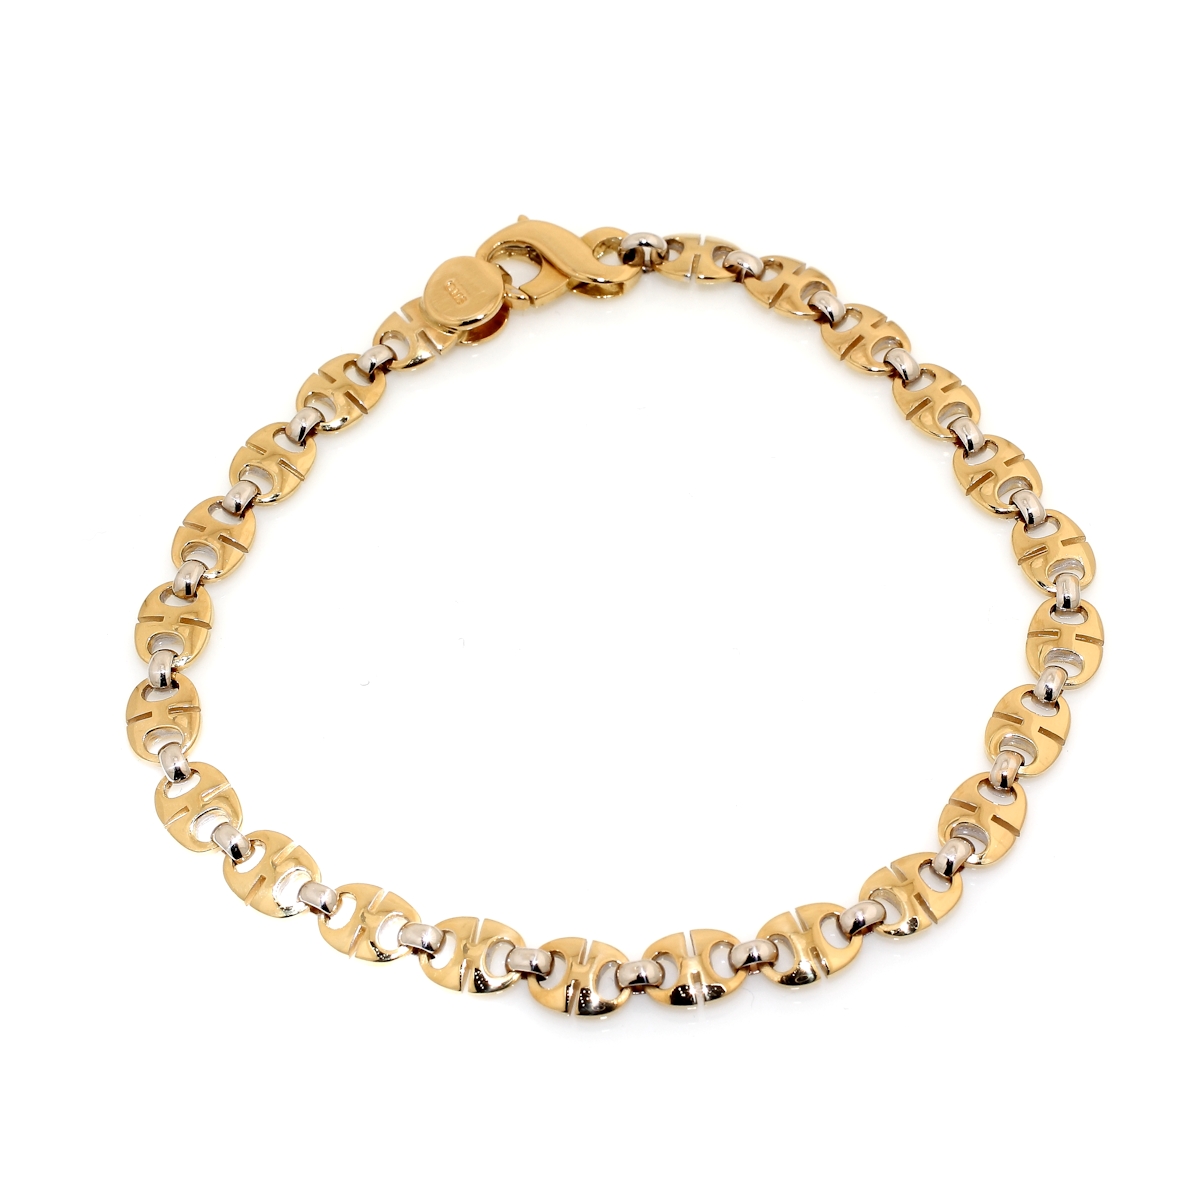 18 Kt. 750 mill. Yellow and White Gold Bracelet - 20 Cm.